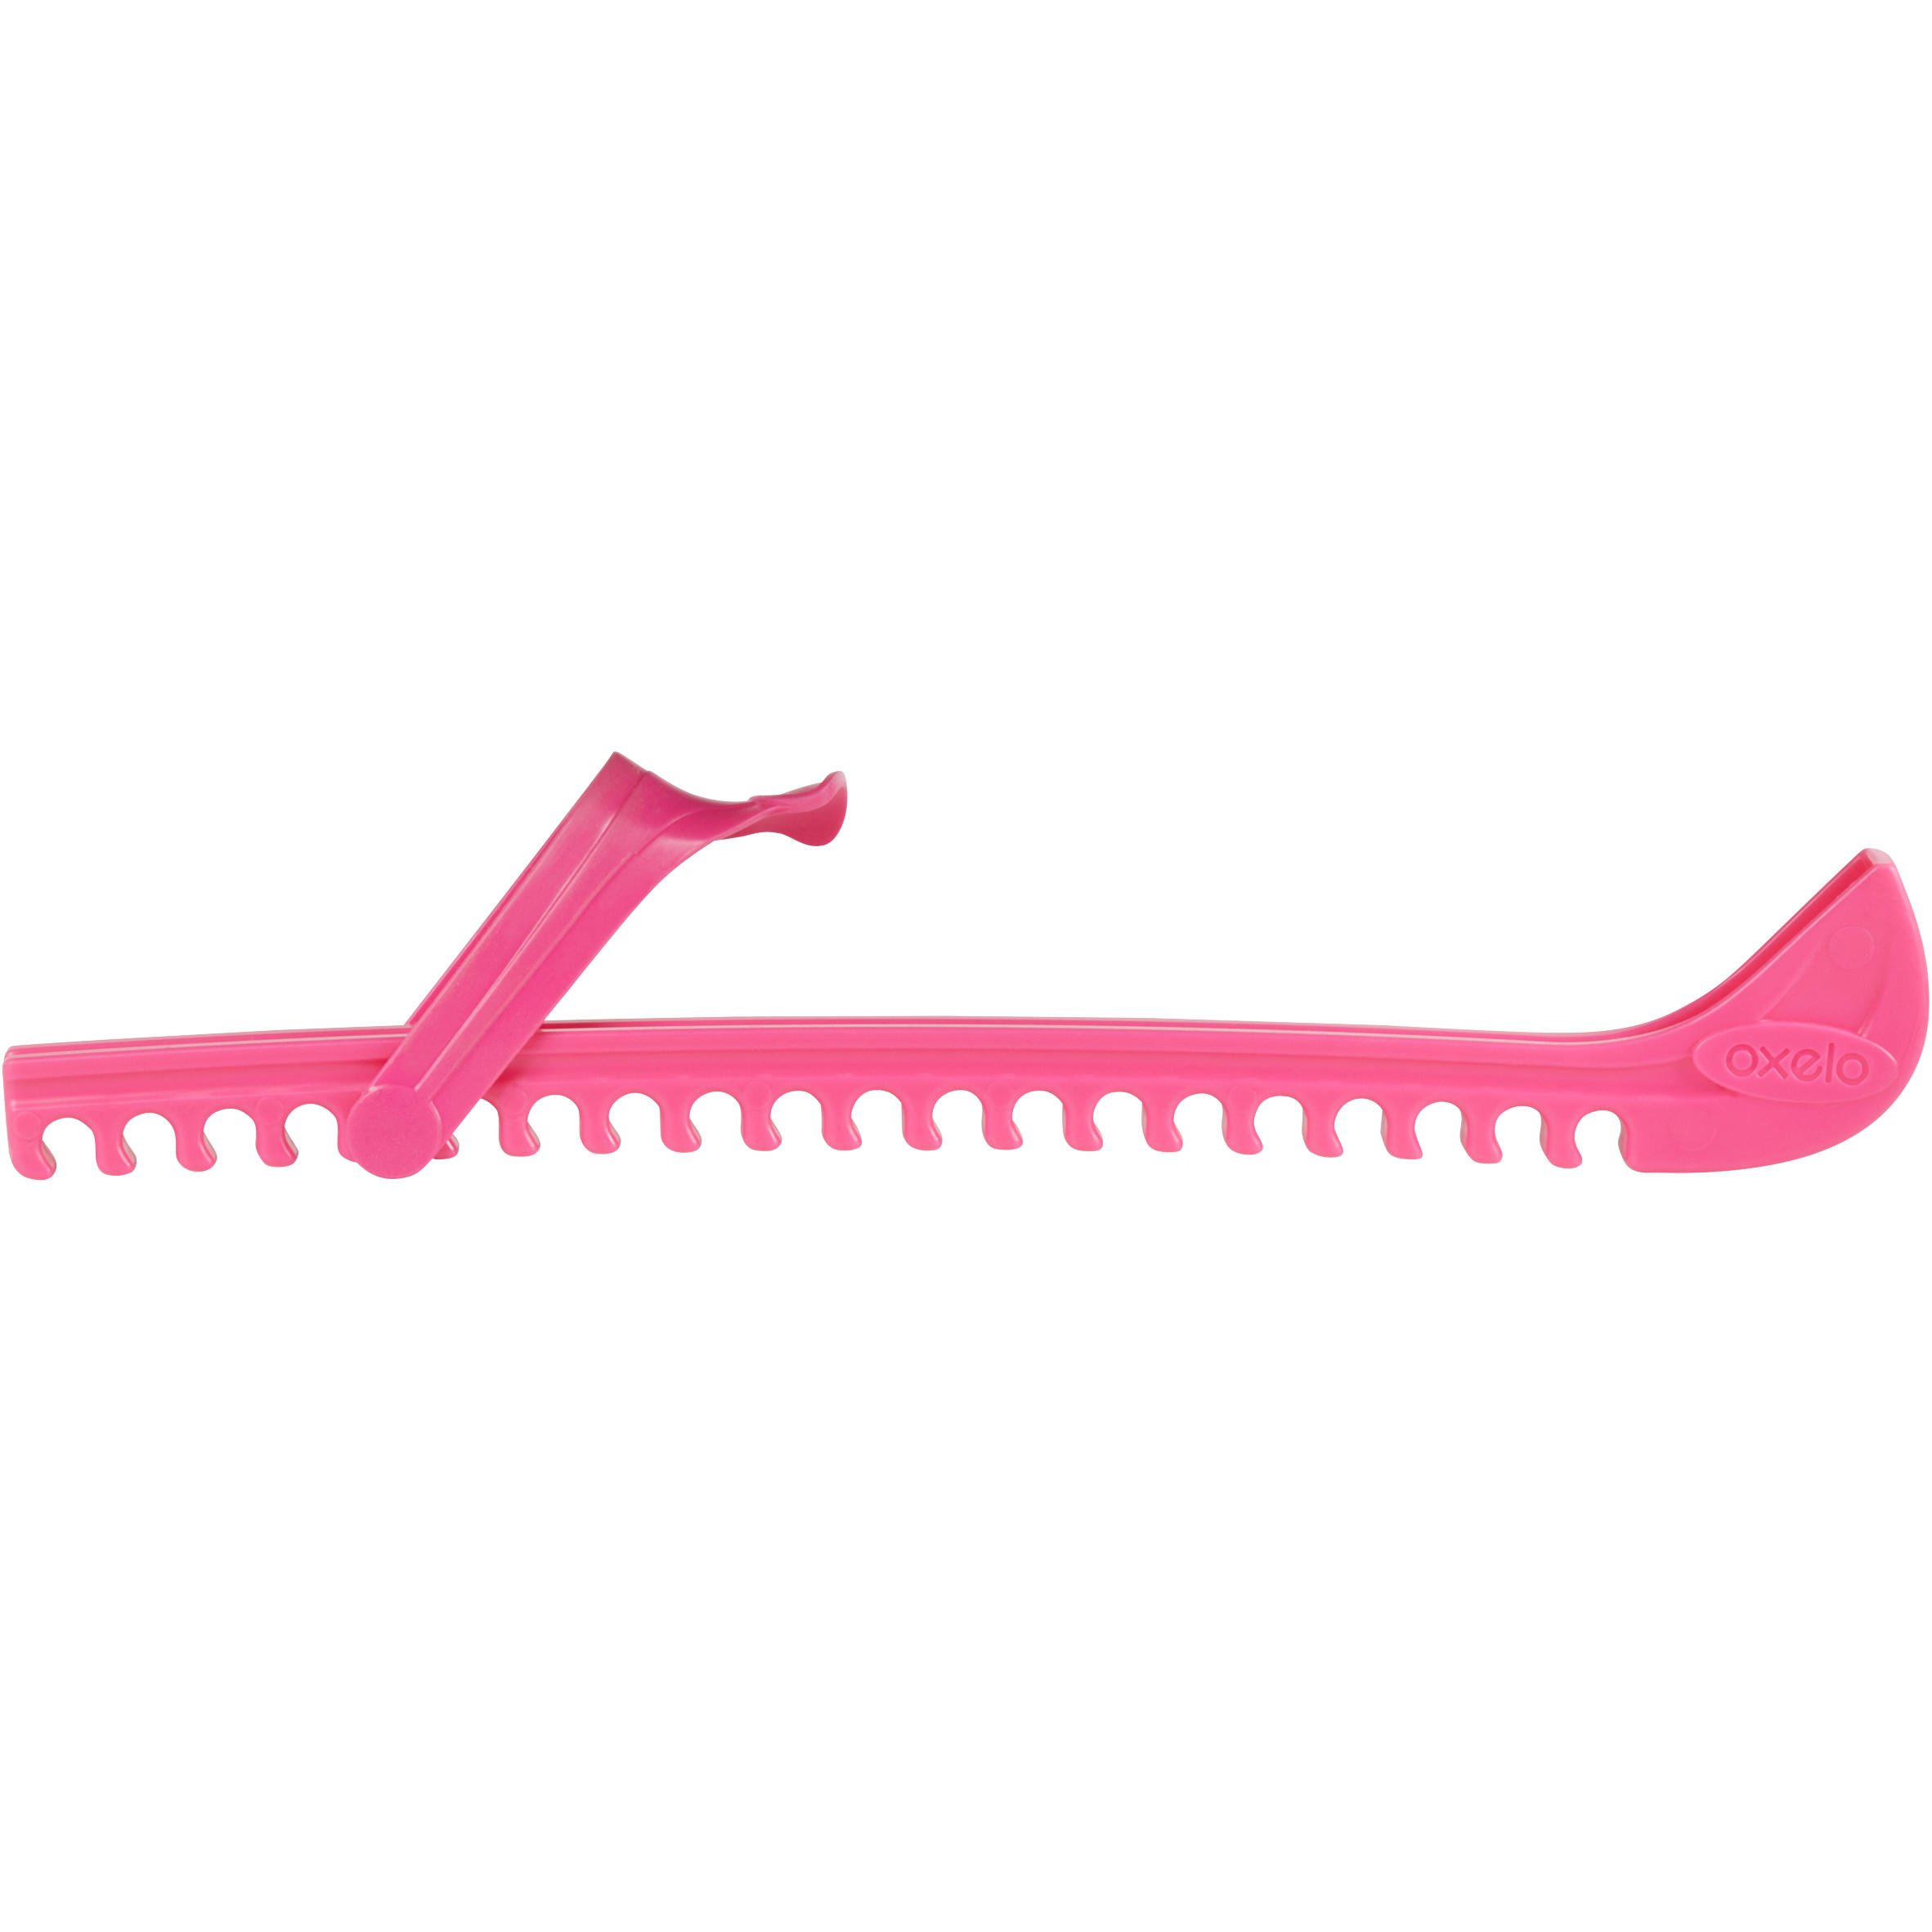 Basic Blade Cover - Pink 2/4